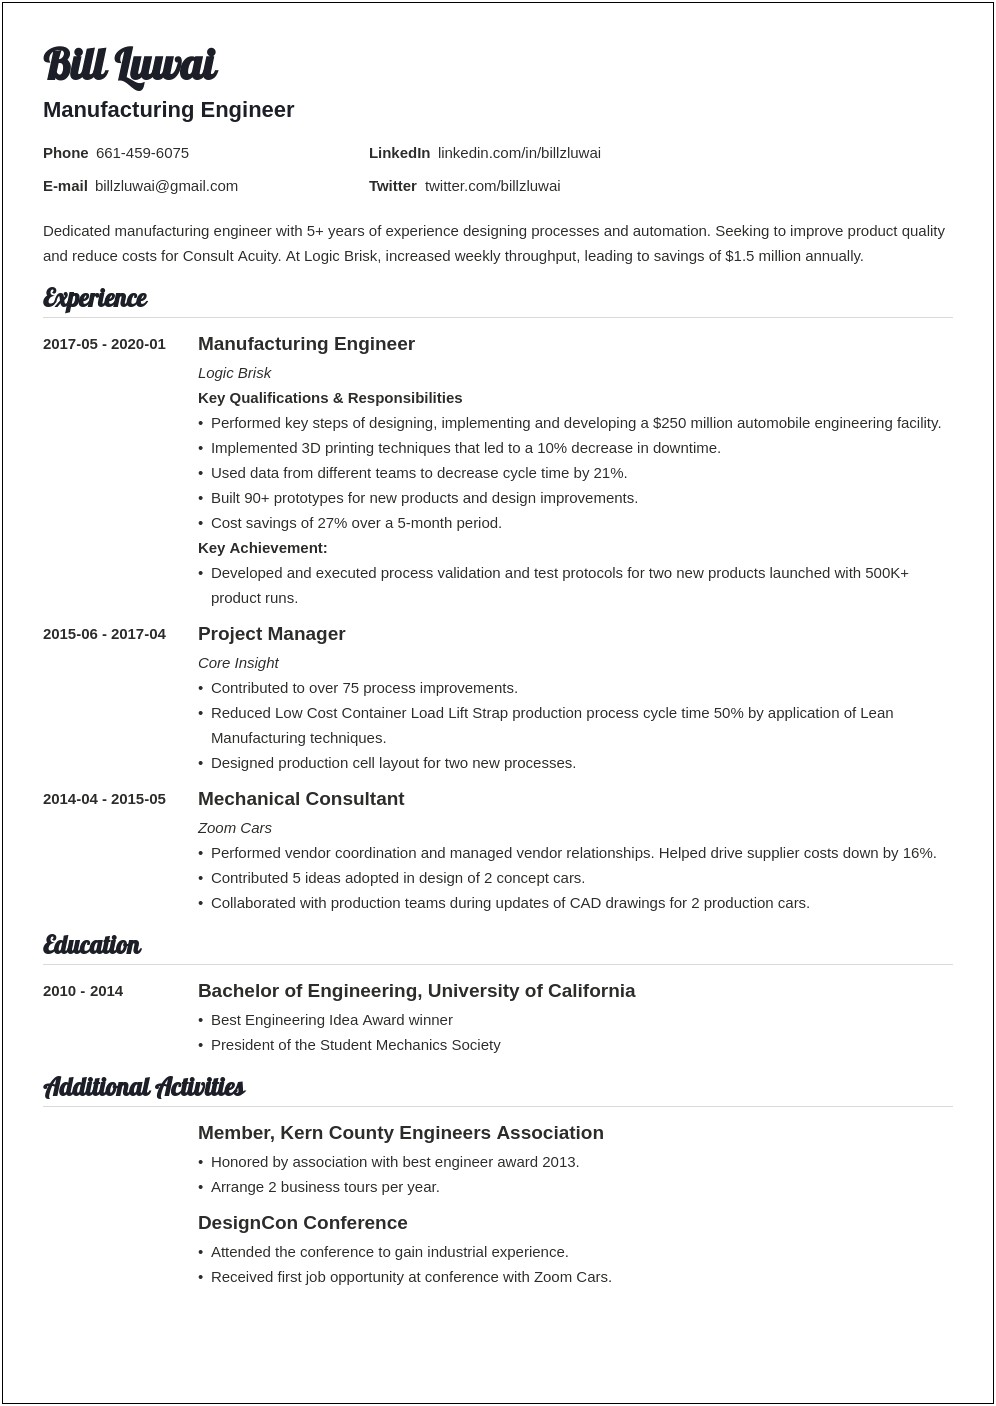 Entry Level Environmental Engineering Resume Examples